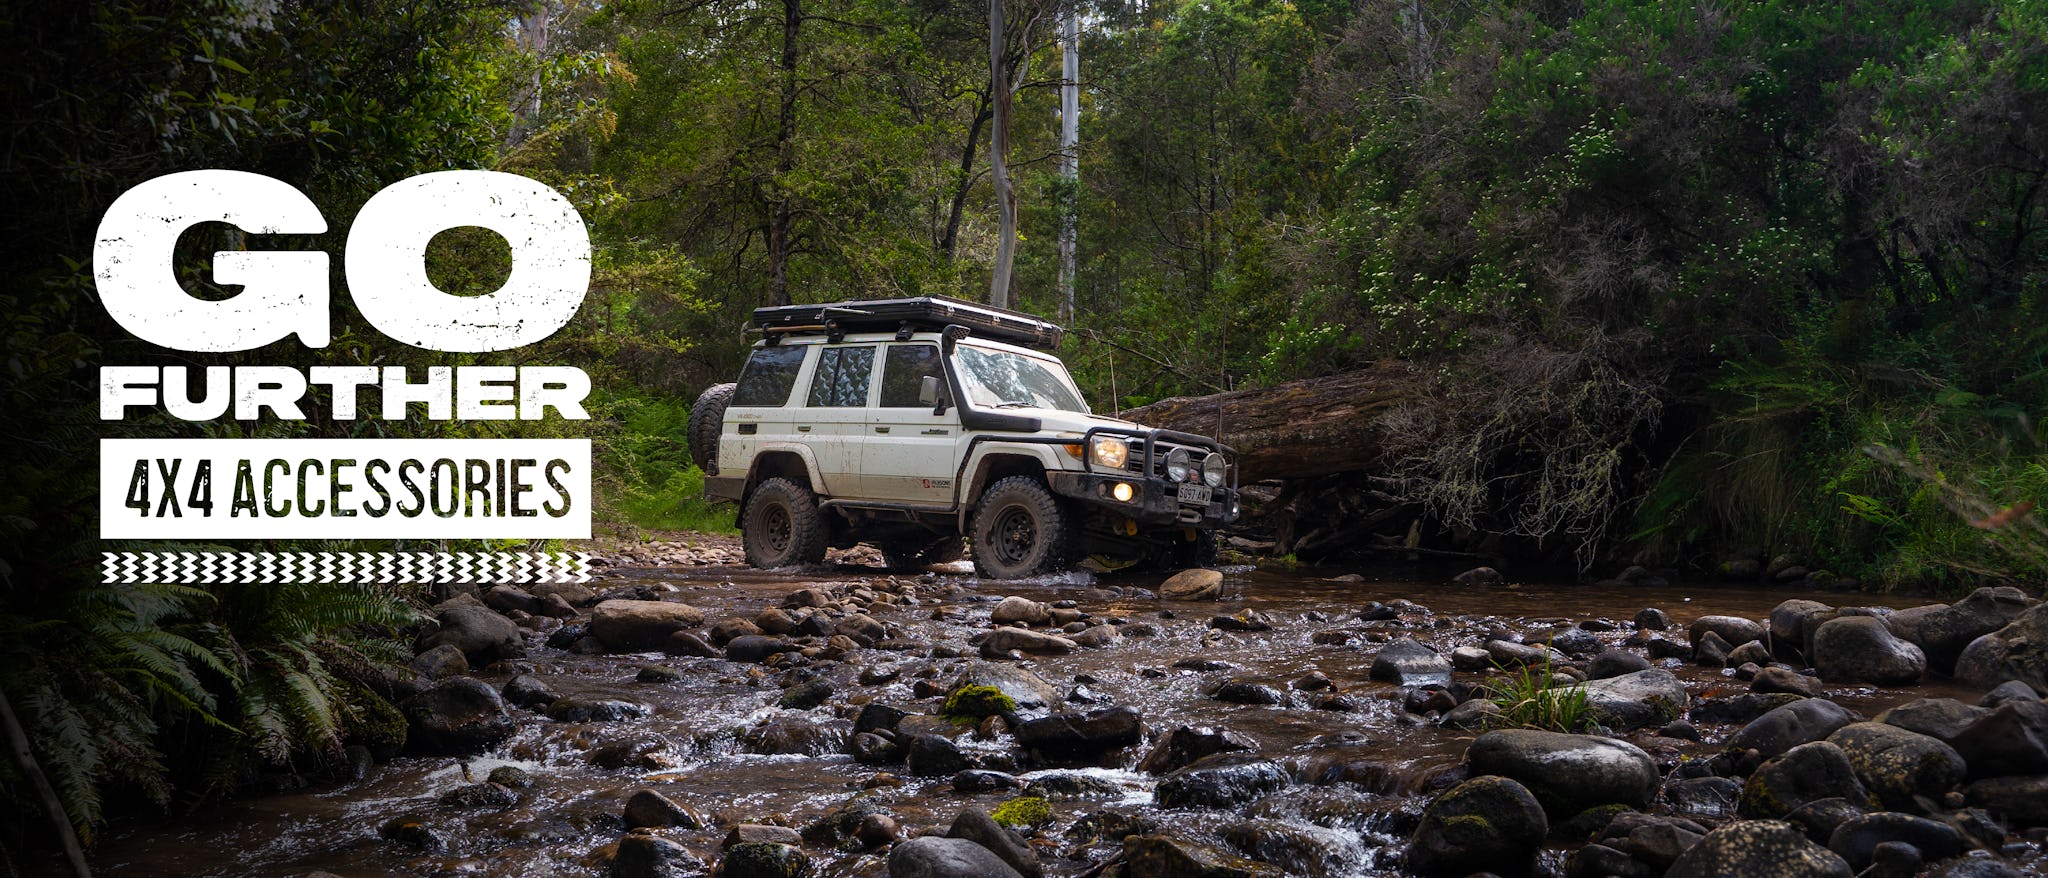 White 4x4 customised with a range of off road accessories, driving through a shallow river